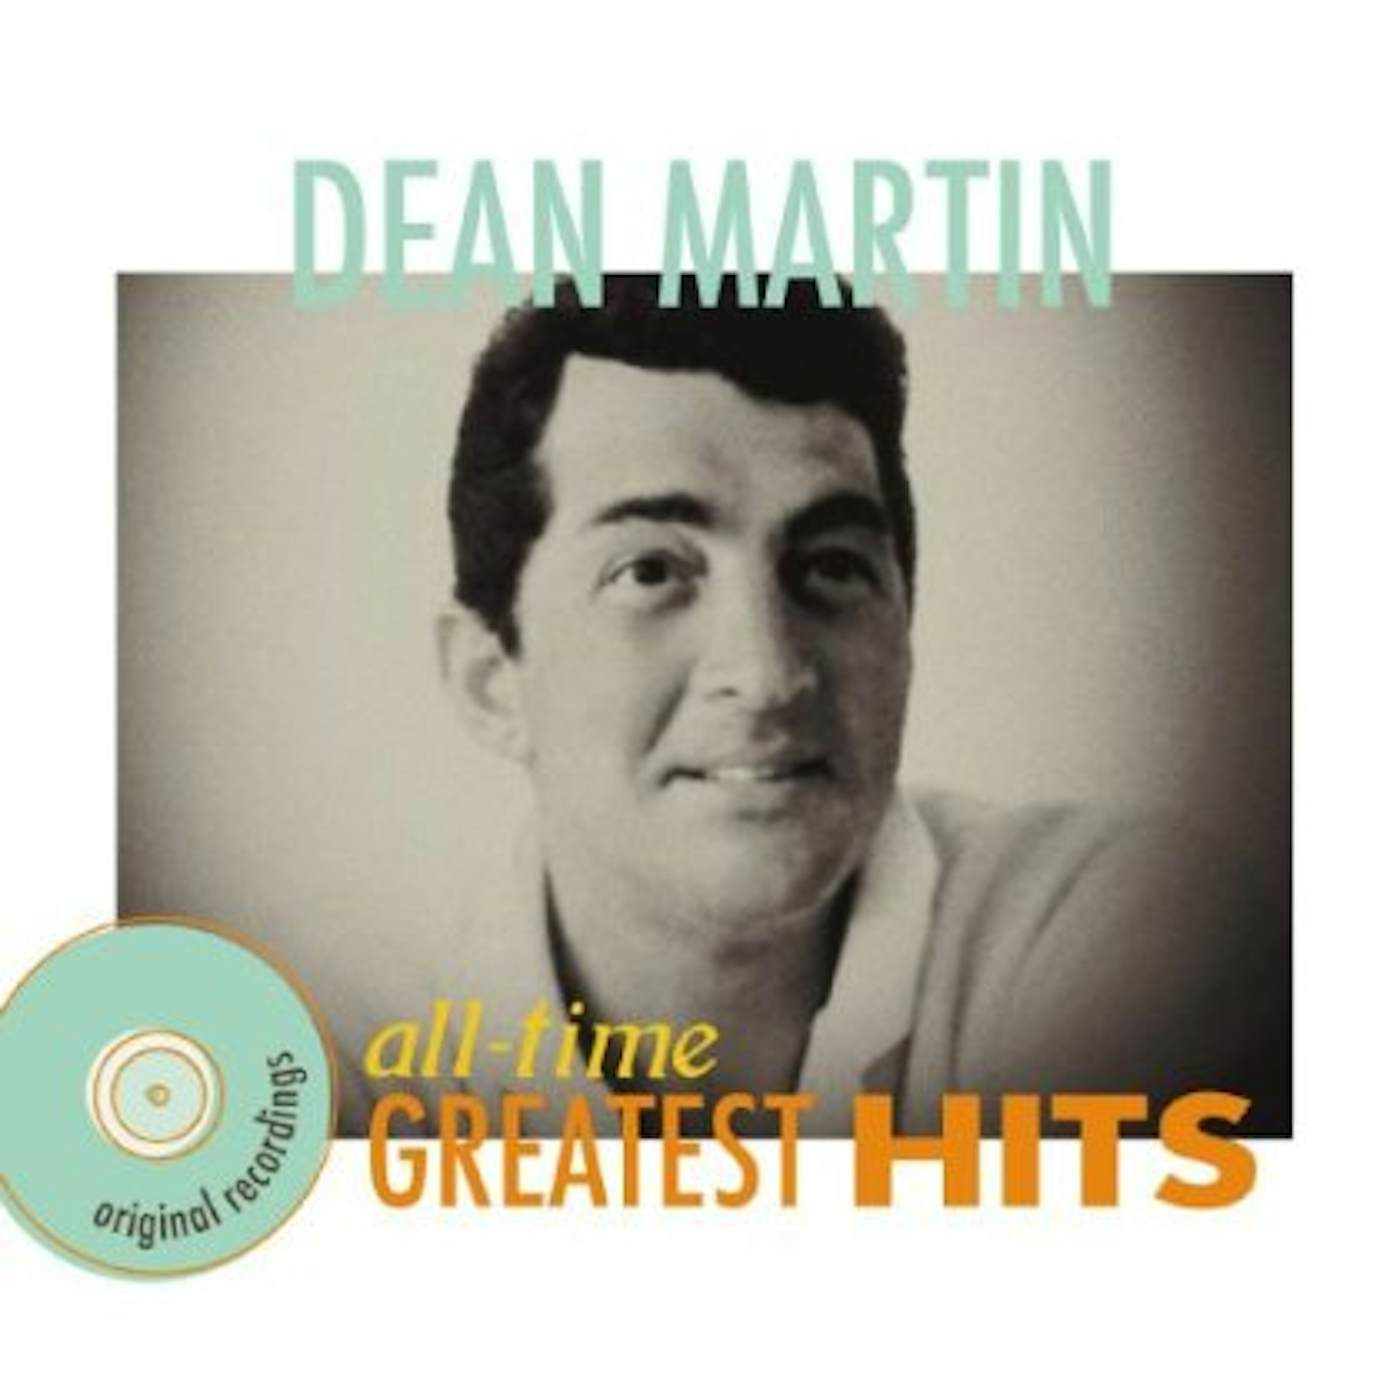 Dean Martin ALL TIME GREATEST HITS CD